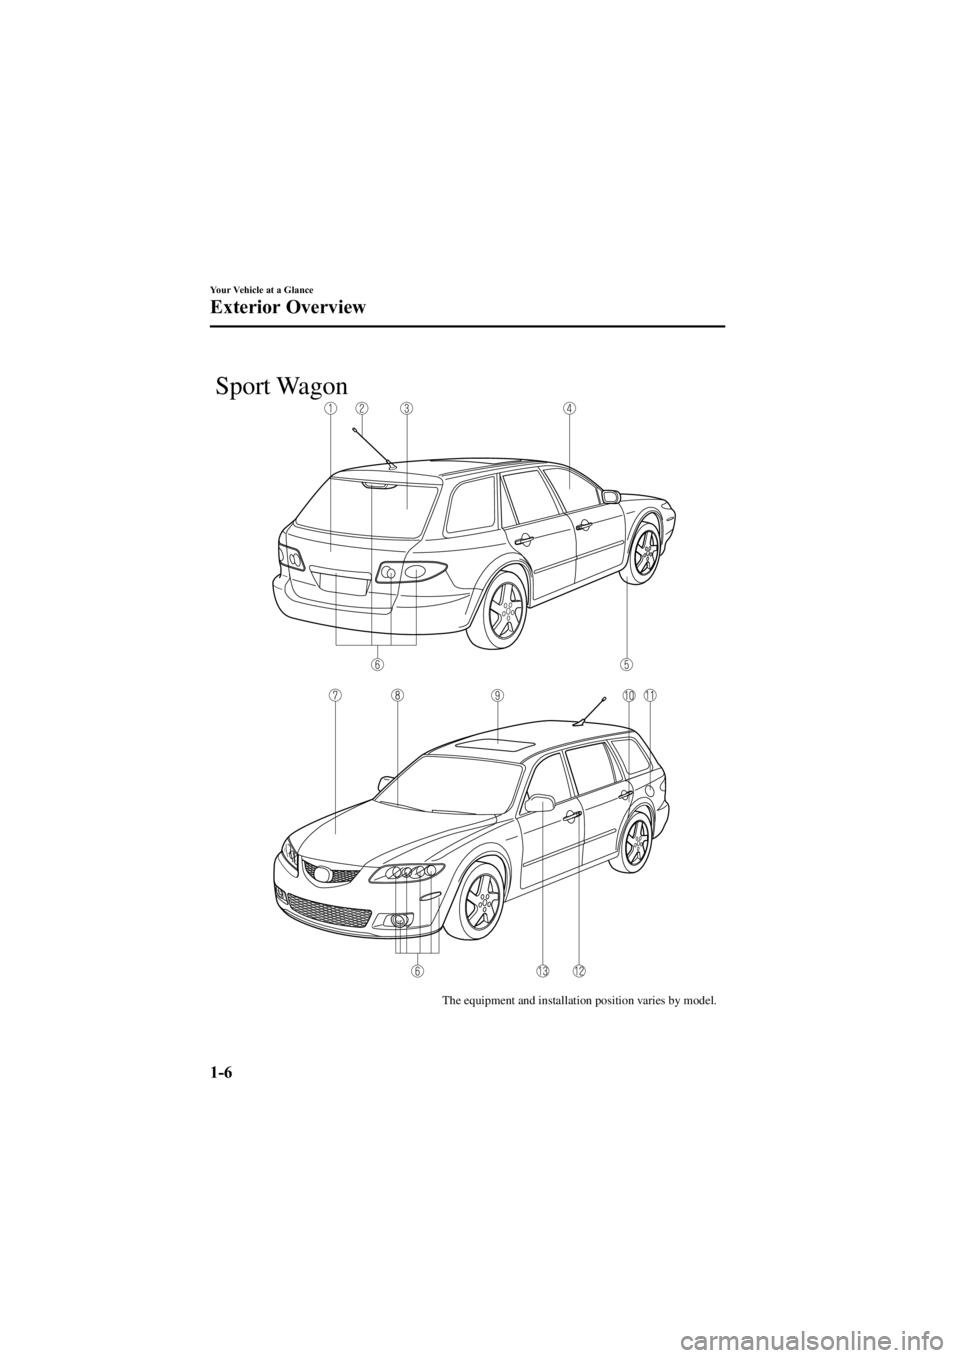 MAZDA MODEL 6 SPORT WAGON 2006 User Guide Black plate (12,1)
The equipment and installation position varies by model.
Sport Wagon
1-6
Your Vehicle at a Glance
Exterior Overview
Mazda6_8V40-EA-05L_Edition1 Page12
Monday, November 28 2005 6:9 P